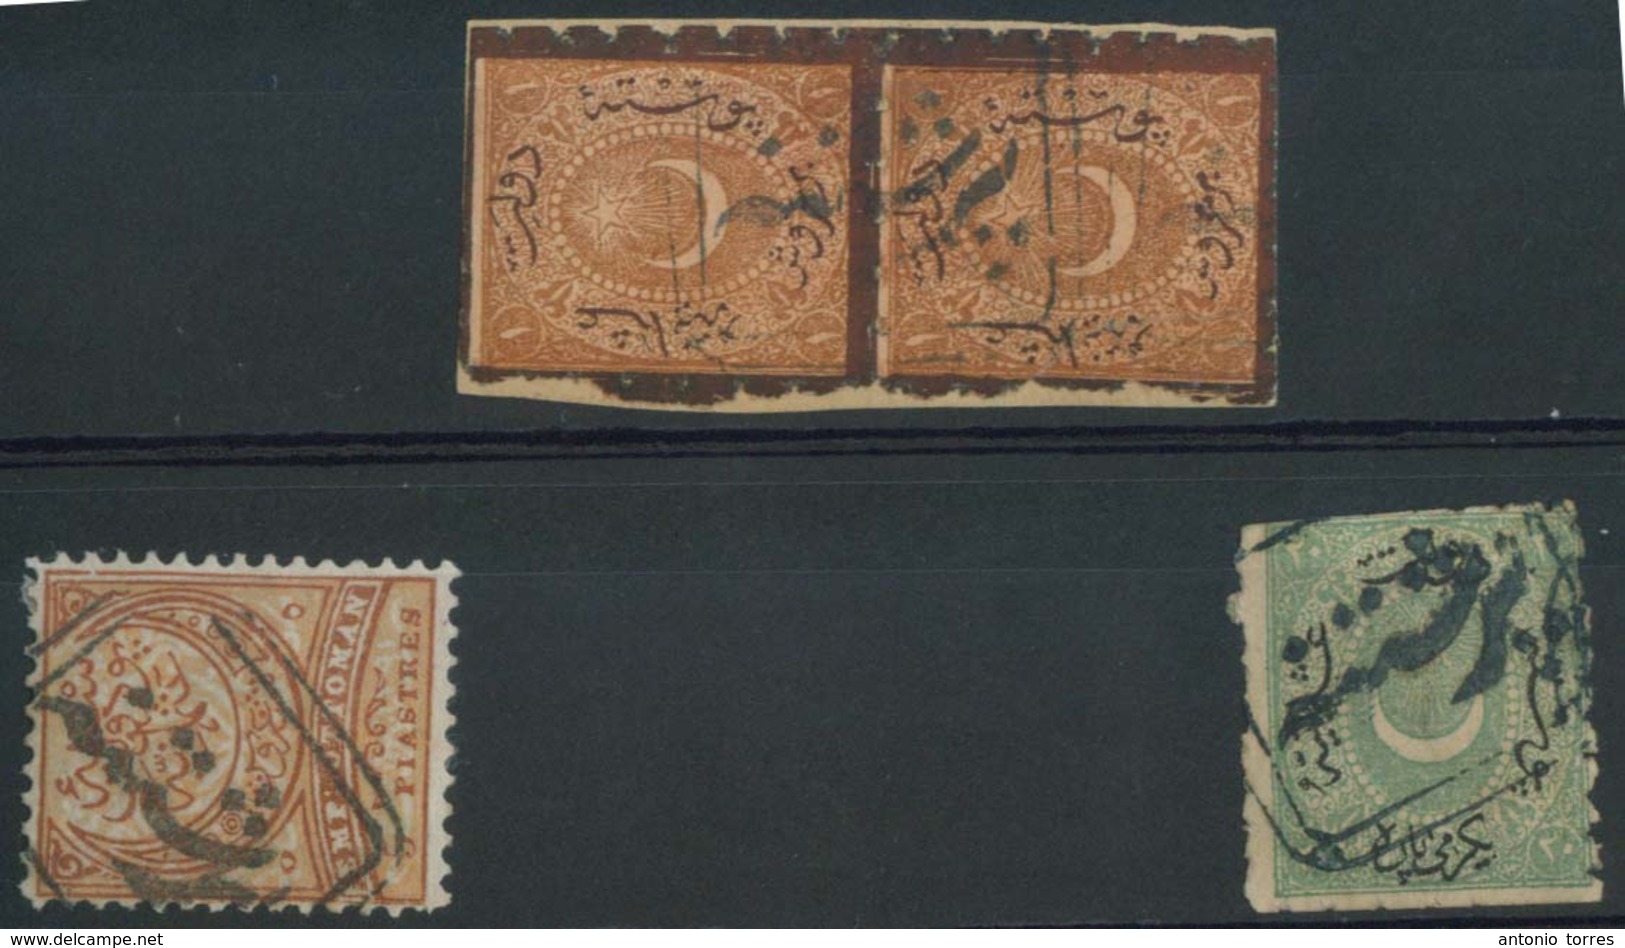 SERBIA. C.1878. Turkish Post. Pristina / Kosovo Capital. 4 Stamps, Box Type On The Nose Cancels (xx / R). Excellent Scar - Serbia